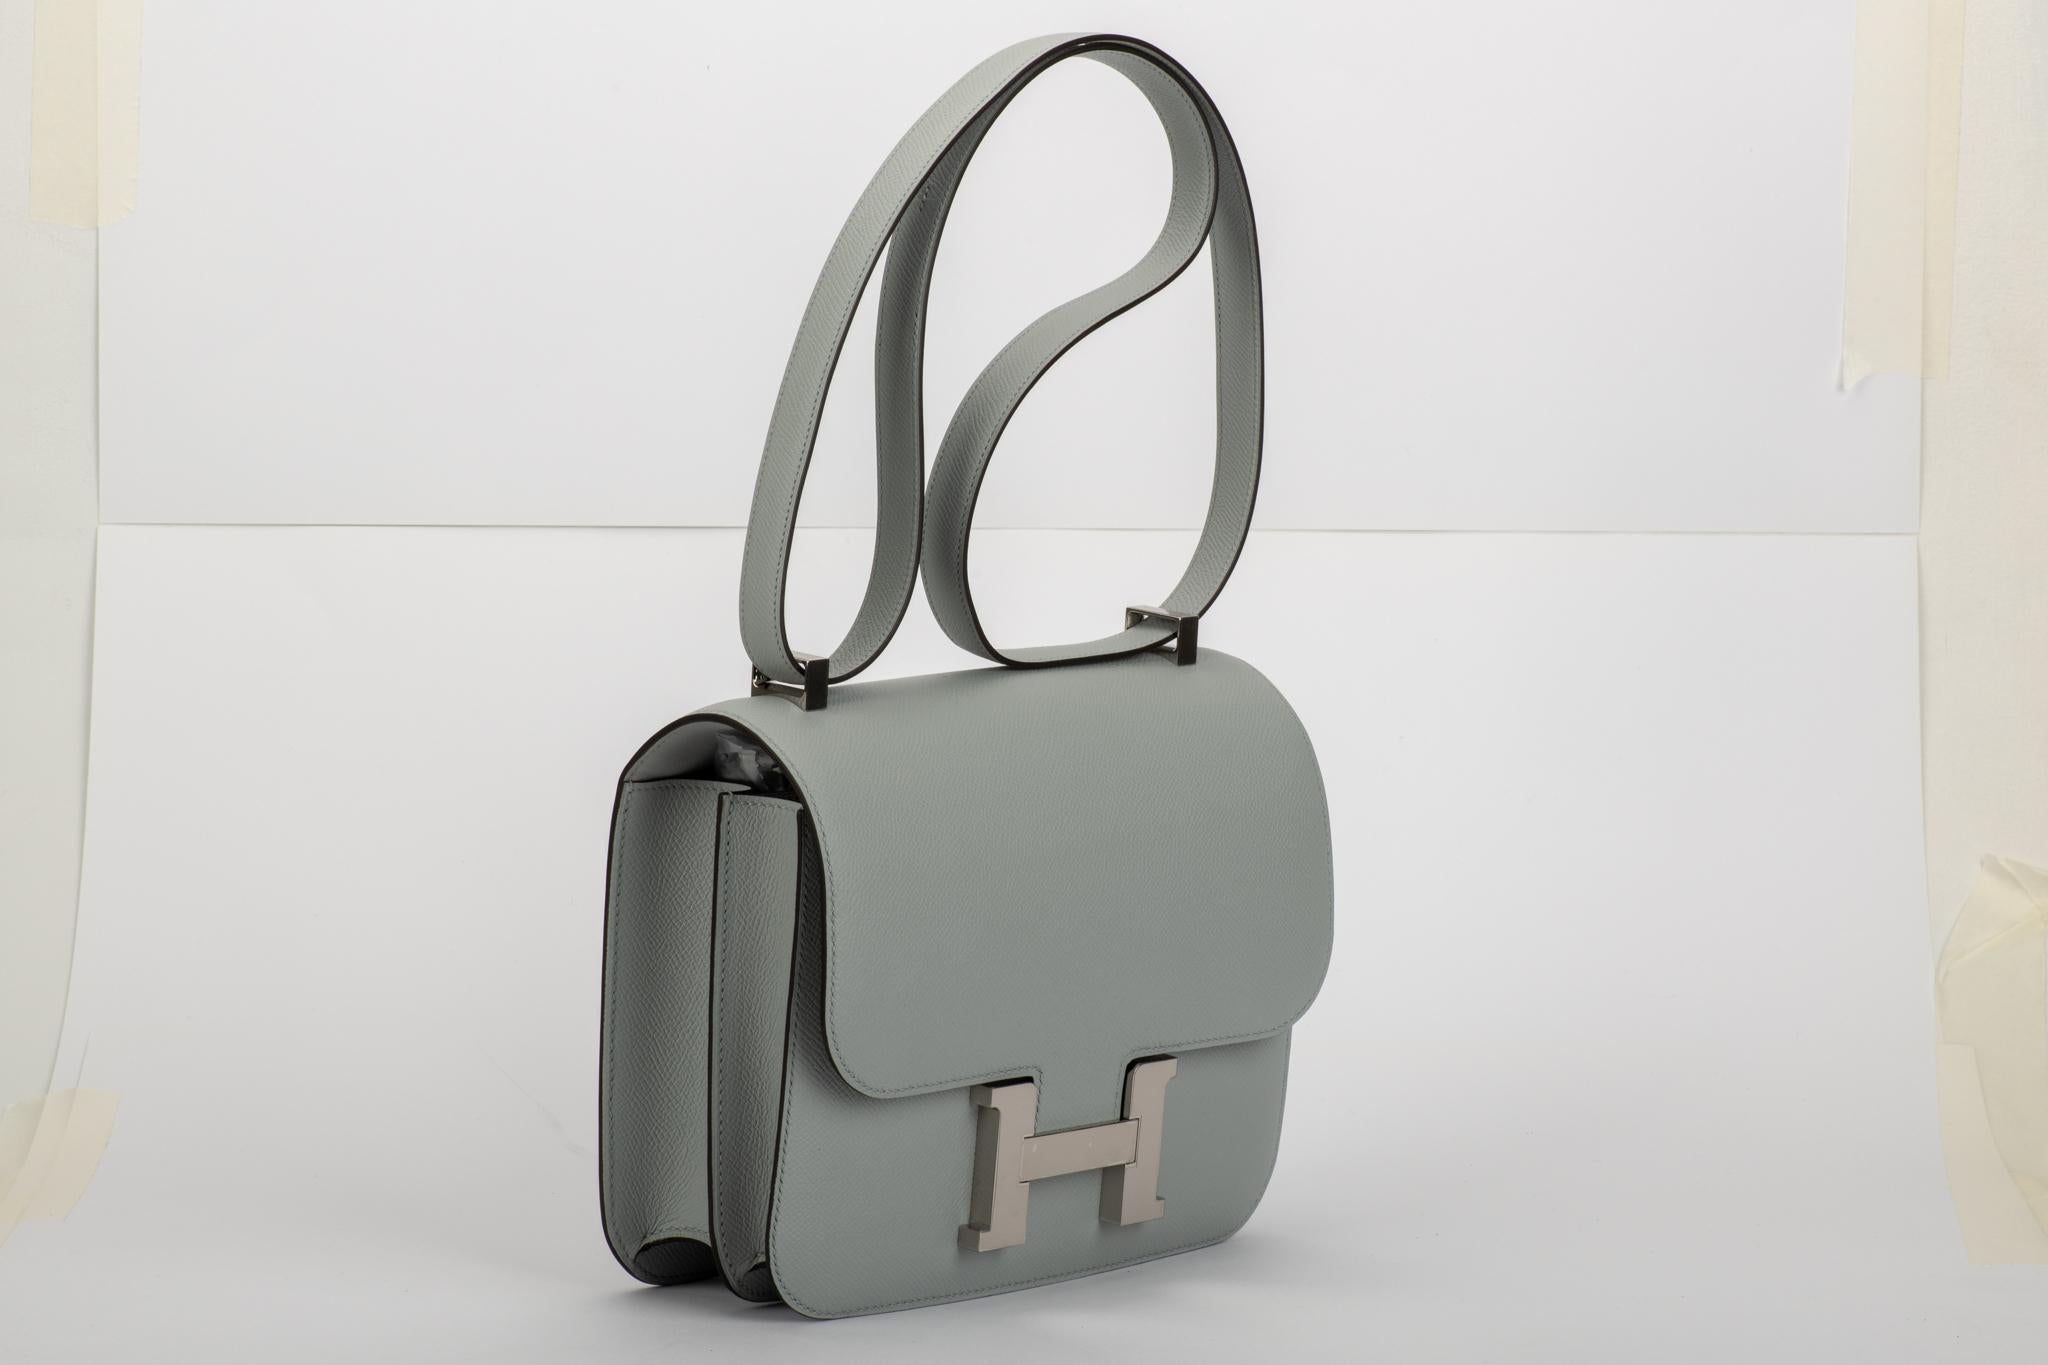 Amazing brand new in box constance 24 cm in Blue Glacier (medium grey) epsom leather and palladium hardware. Plastic on hardware. Shoulder drop 9.5/18. Comes with dustcover, booklet, box, ribbon and shopping bag.
